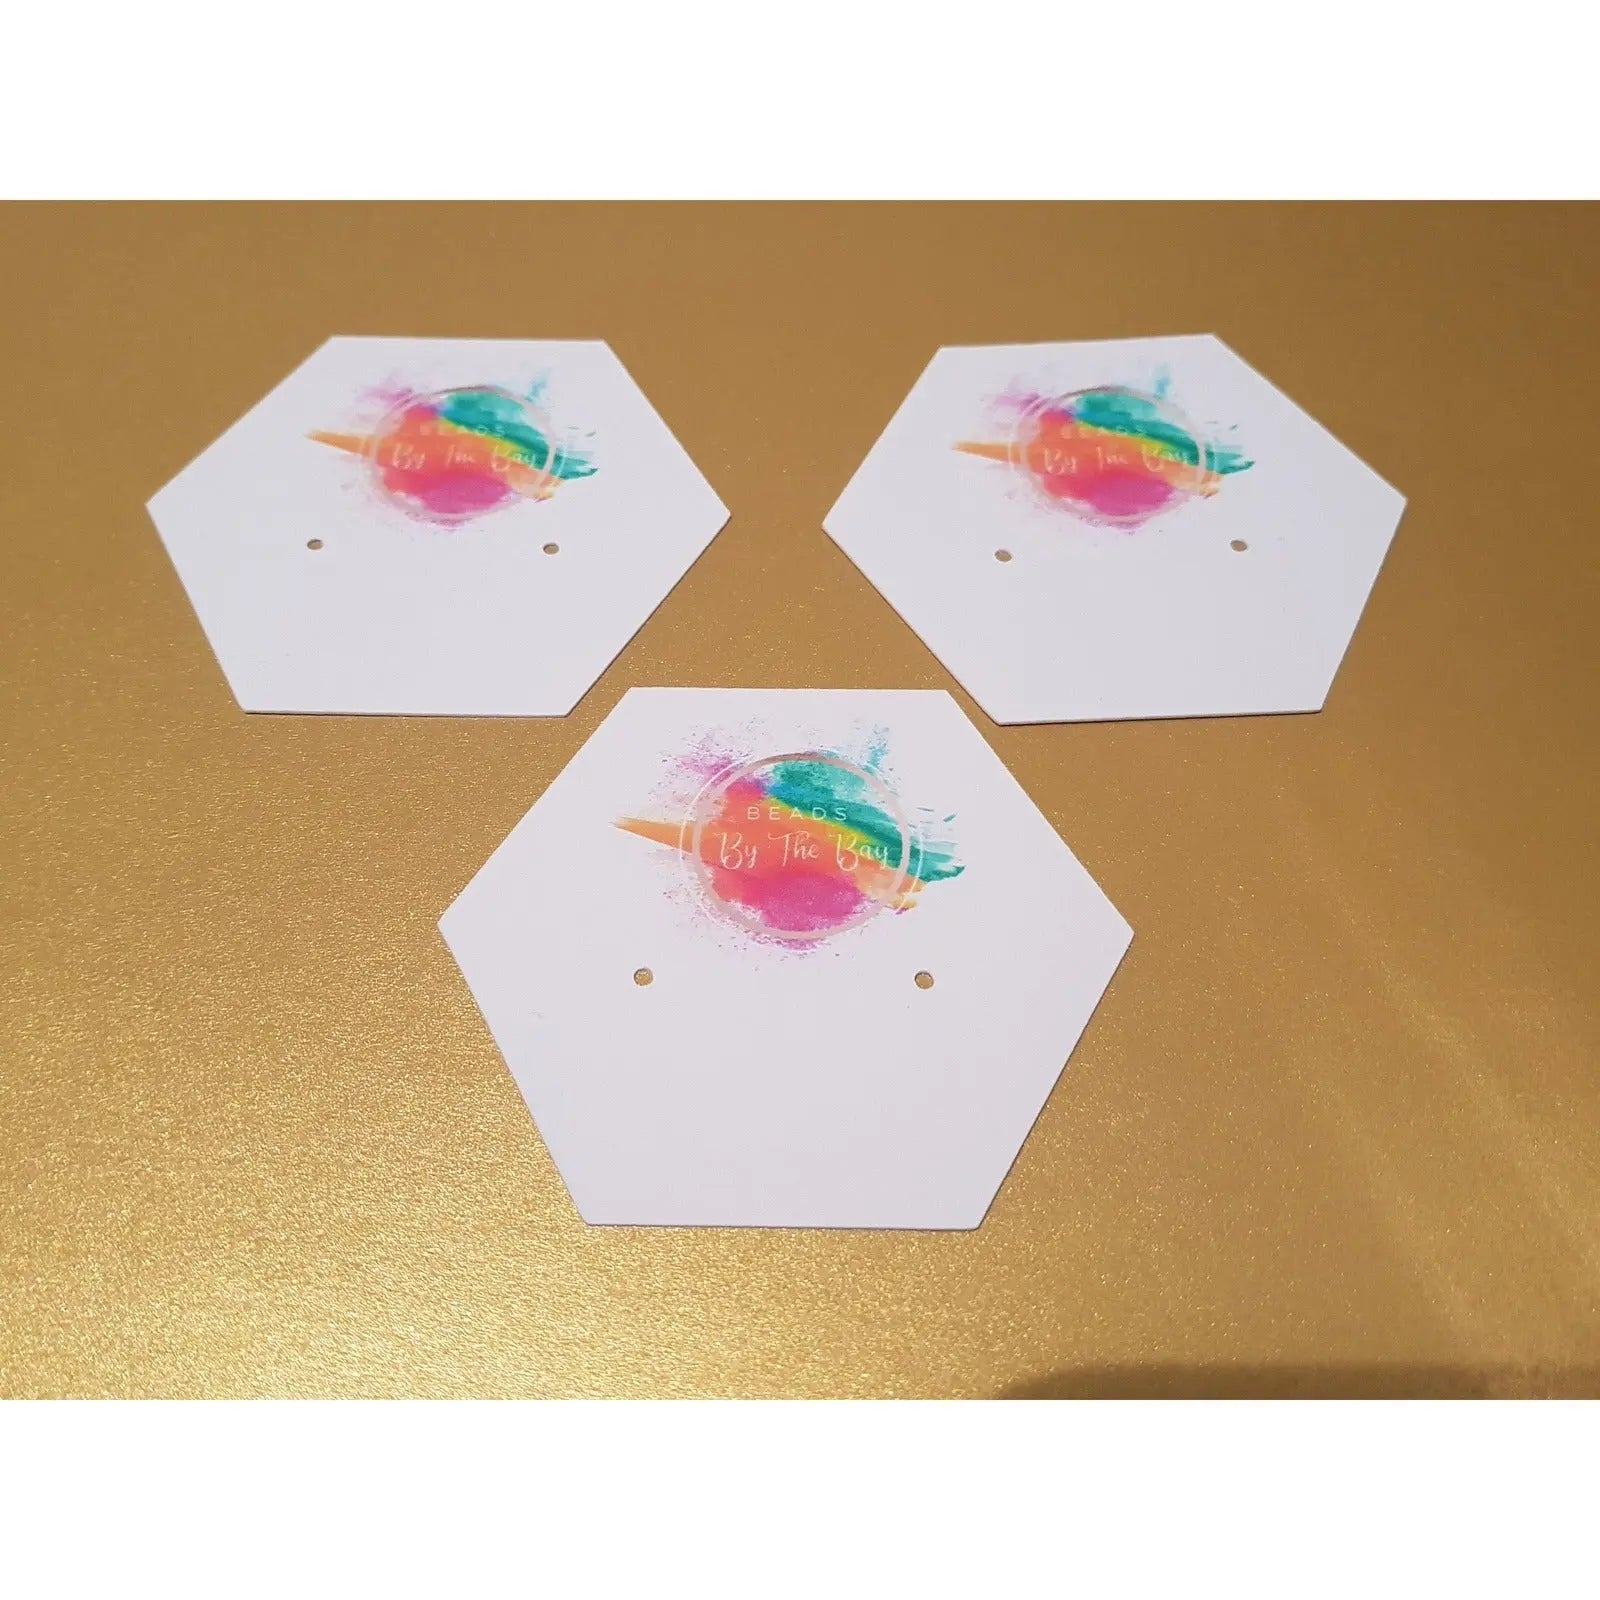 Earring Tag - Hexagonal (6 sided) Paper Love Card